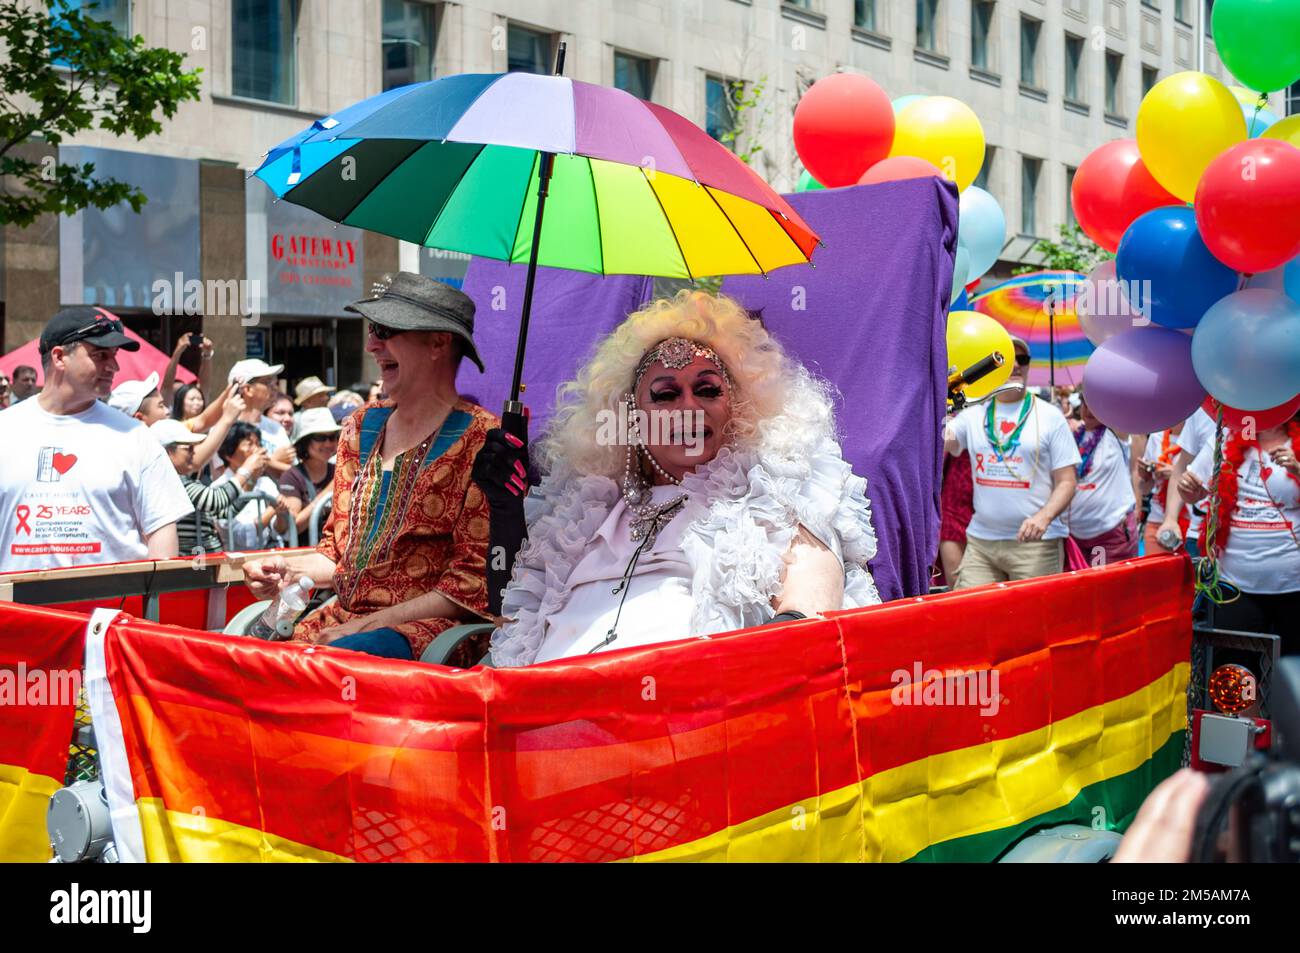 Two people in a small float covered in rainbow symbols partake in the LGBTQ+ celebration event. One of them is dressed as a drag queen. Stock Photo